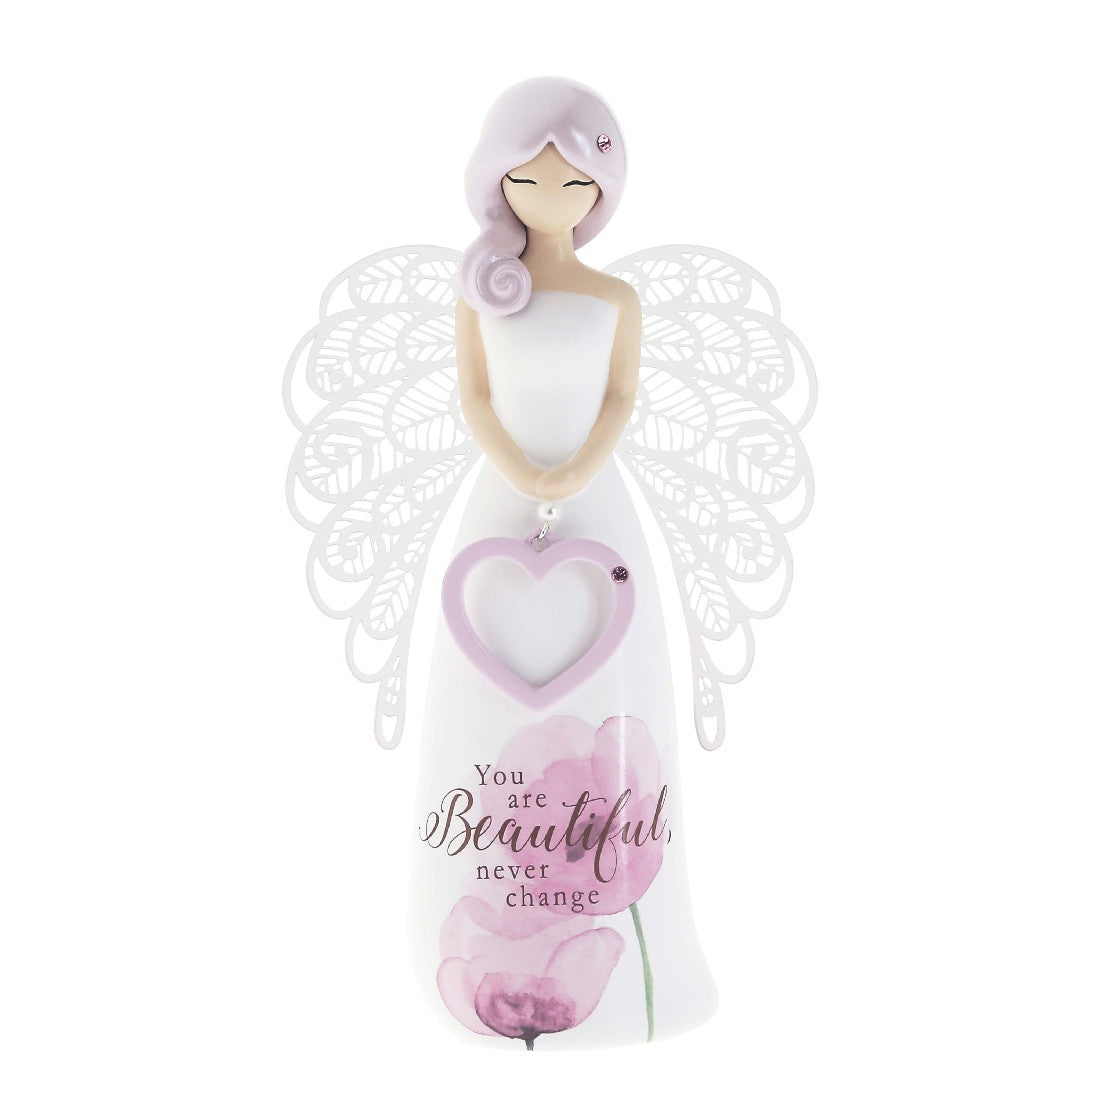 You are an Angel FIGURINE 155MM YOU ARE BEAUTIFUL